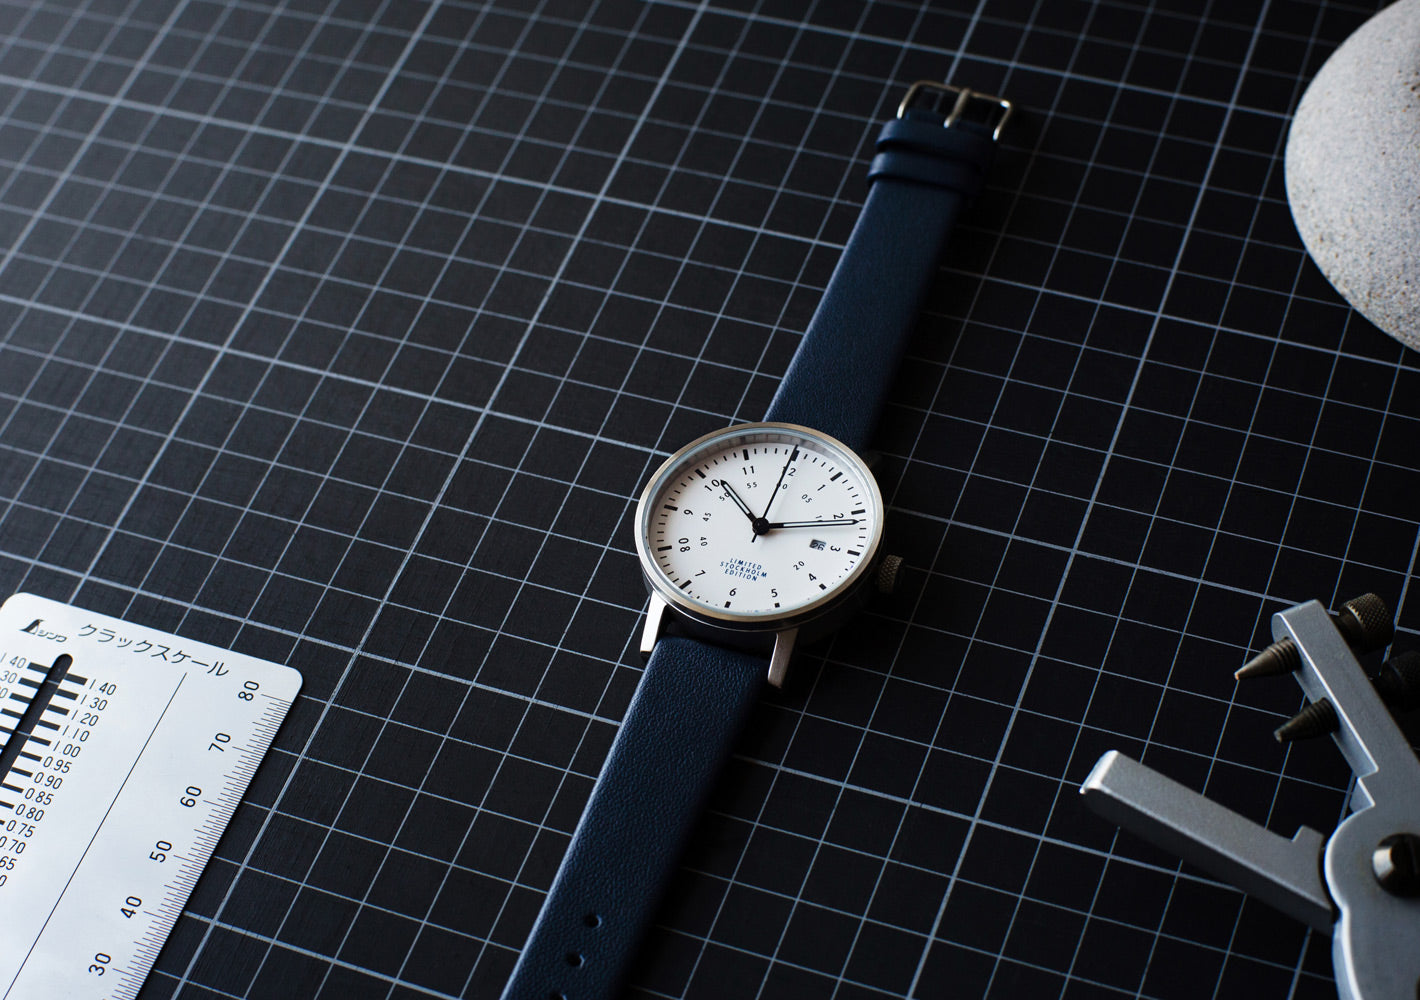 The Limited Edition V03D-STHLM from VOID Watches, designed by David Ericsson.